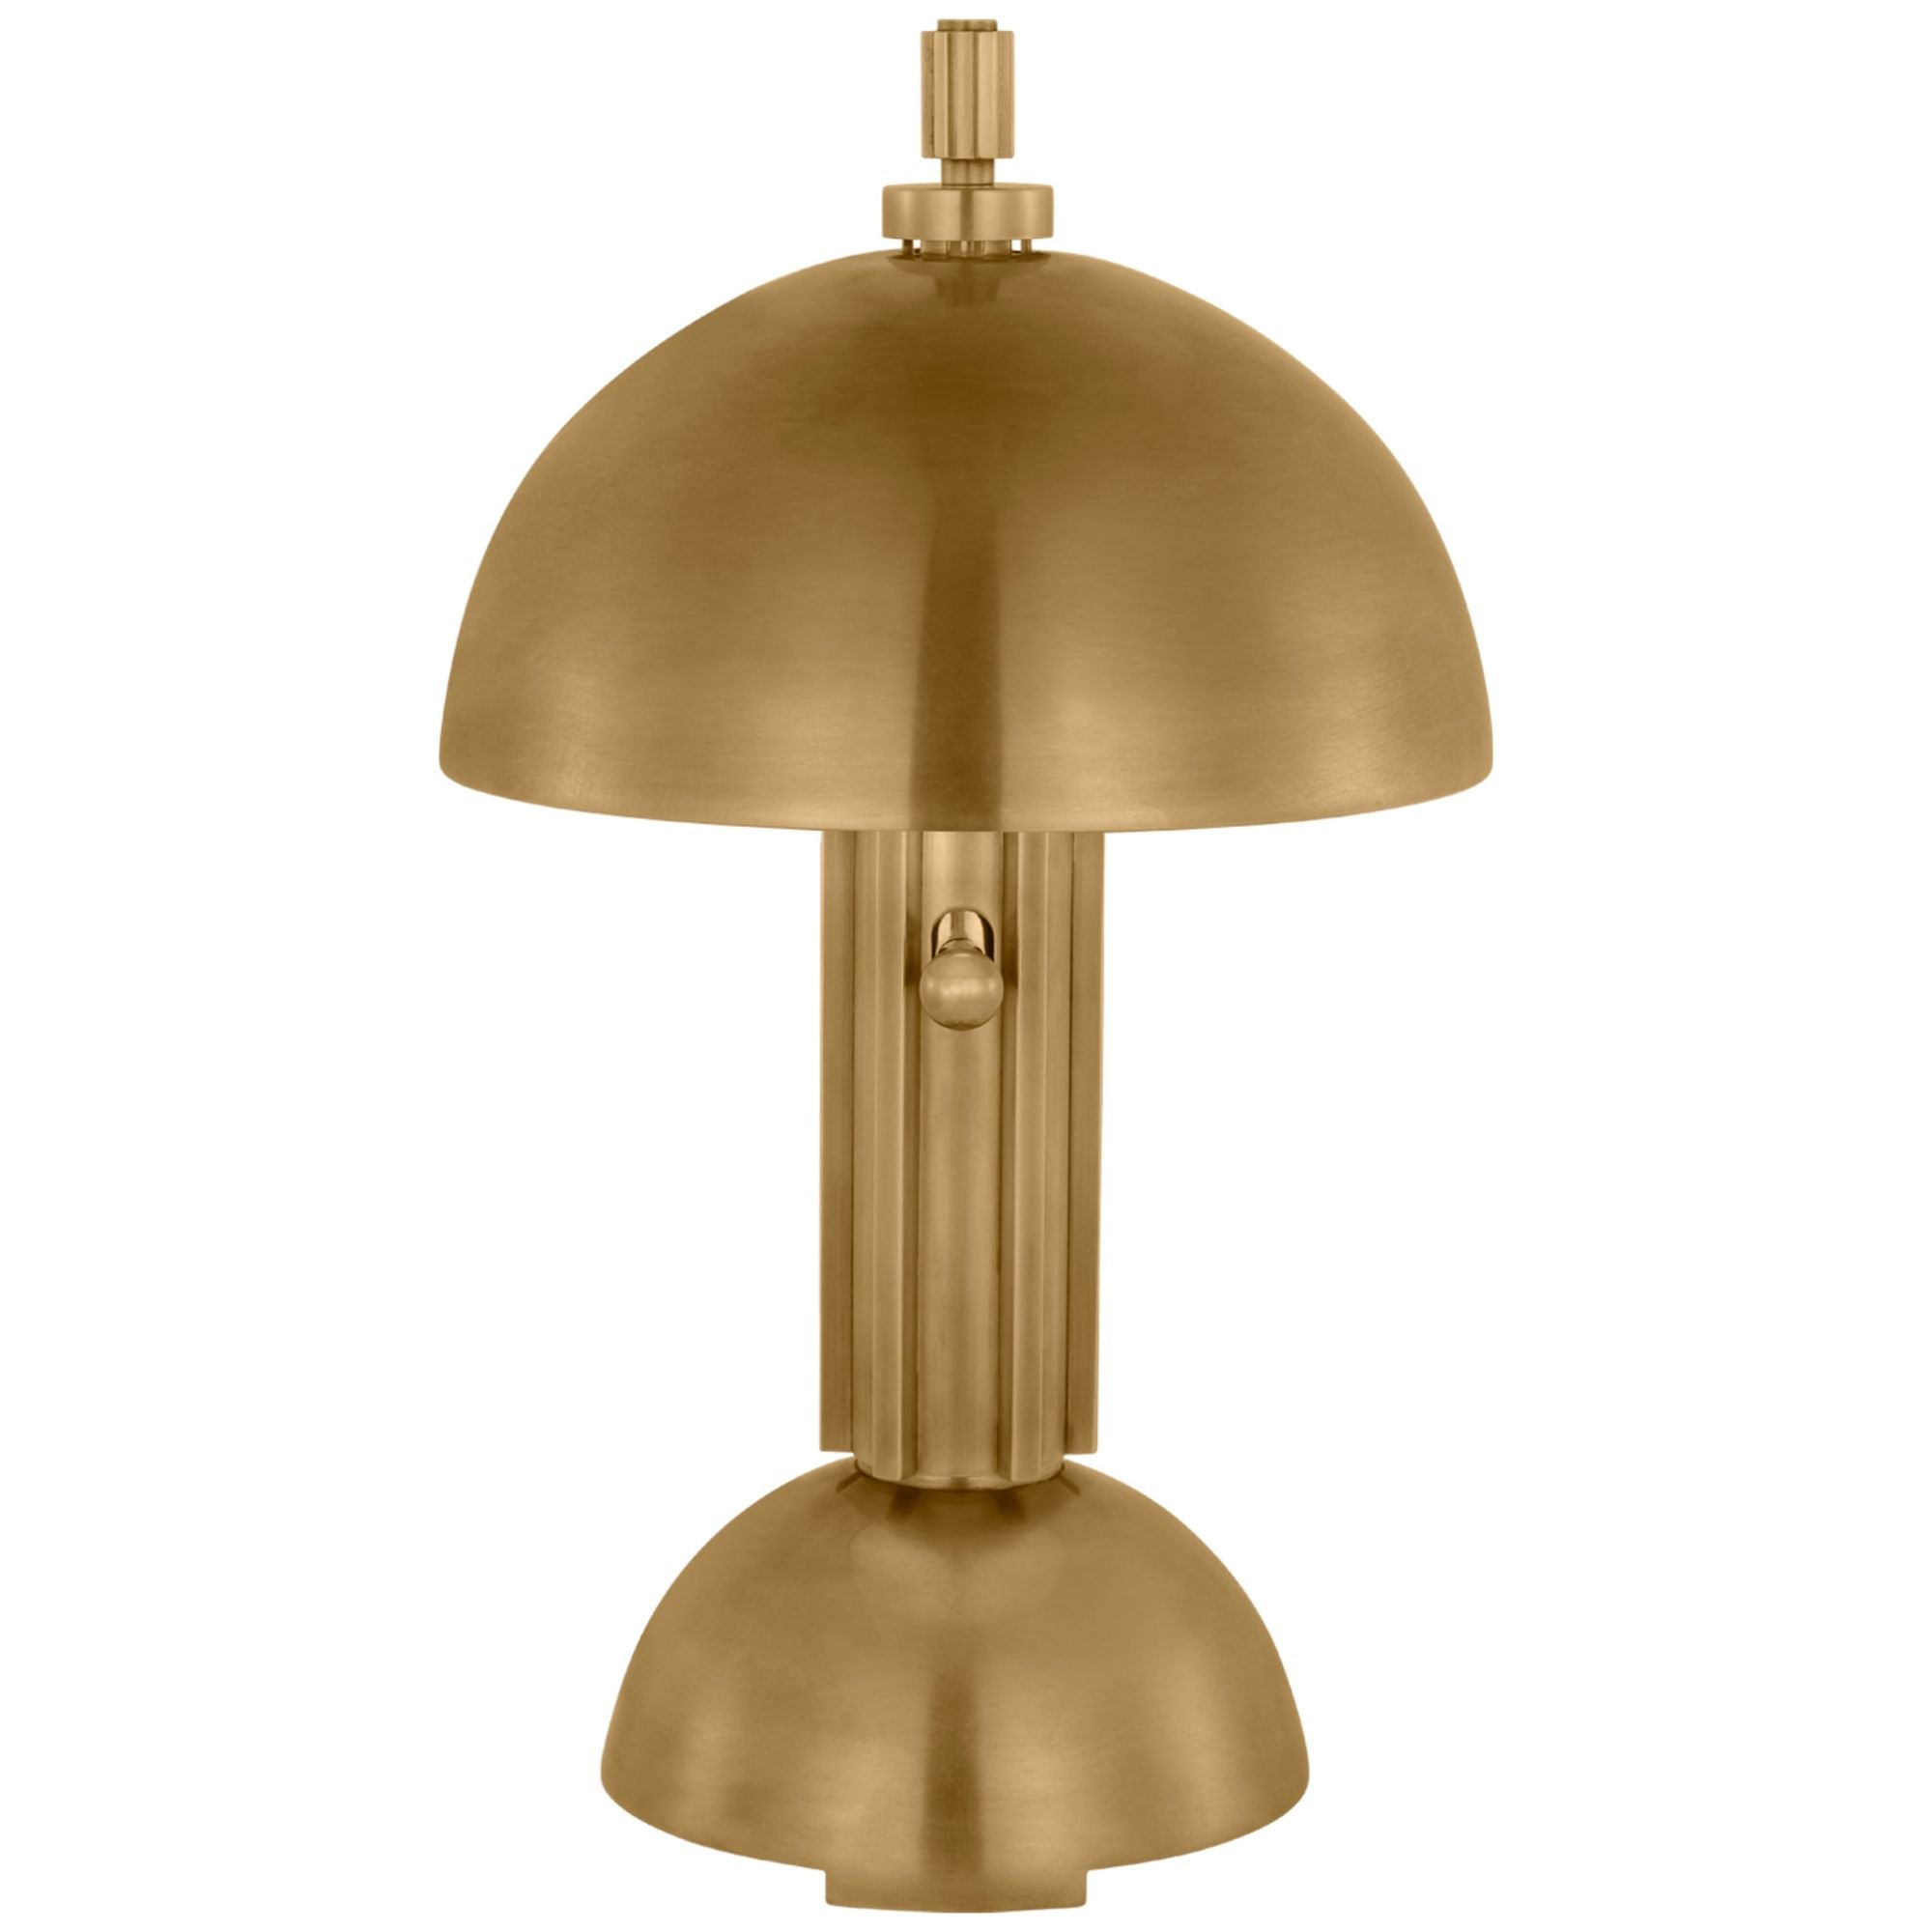 BUSSMAN Wall or Table Antique Brass Lamp